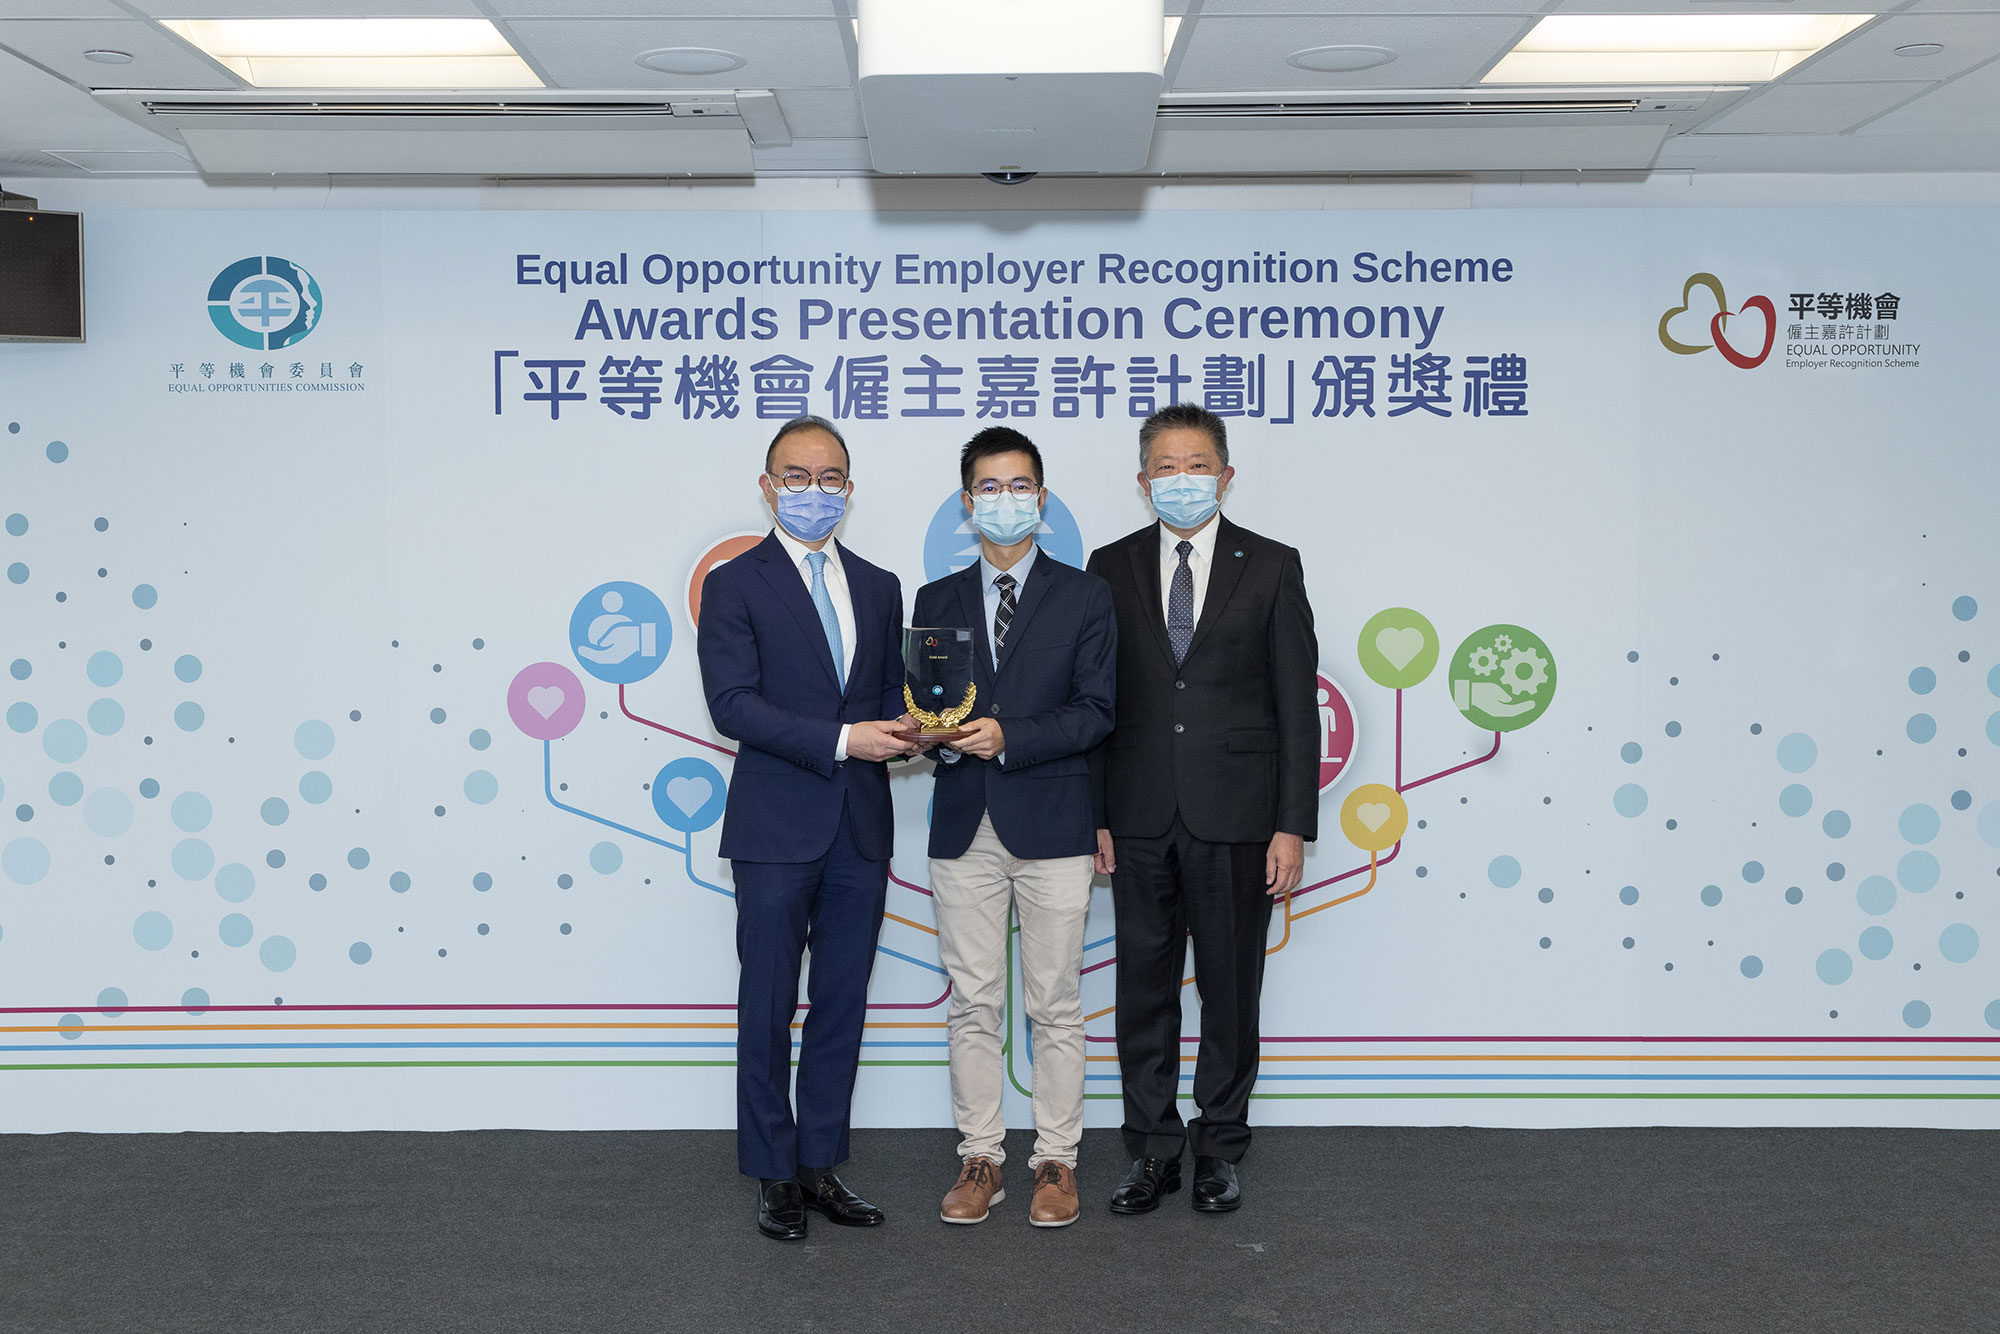 Mr Erick TSANG Kwok-wai, IDSM, JP, Secretary for Constitutional and Mainland Affairs (left) and Mr Ricky CHU Man-kin, IDS, Chairperson of the Equal Opportunities Commission (right), present the trophy to the representative of China Aircraft Services Limited (centre), winner of the Gold Award of the Equal Opportunity Employer Recognition Scheme.